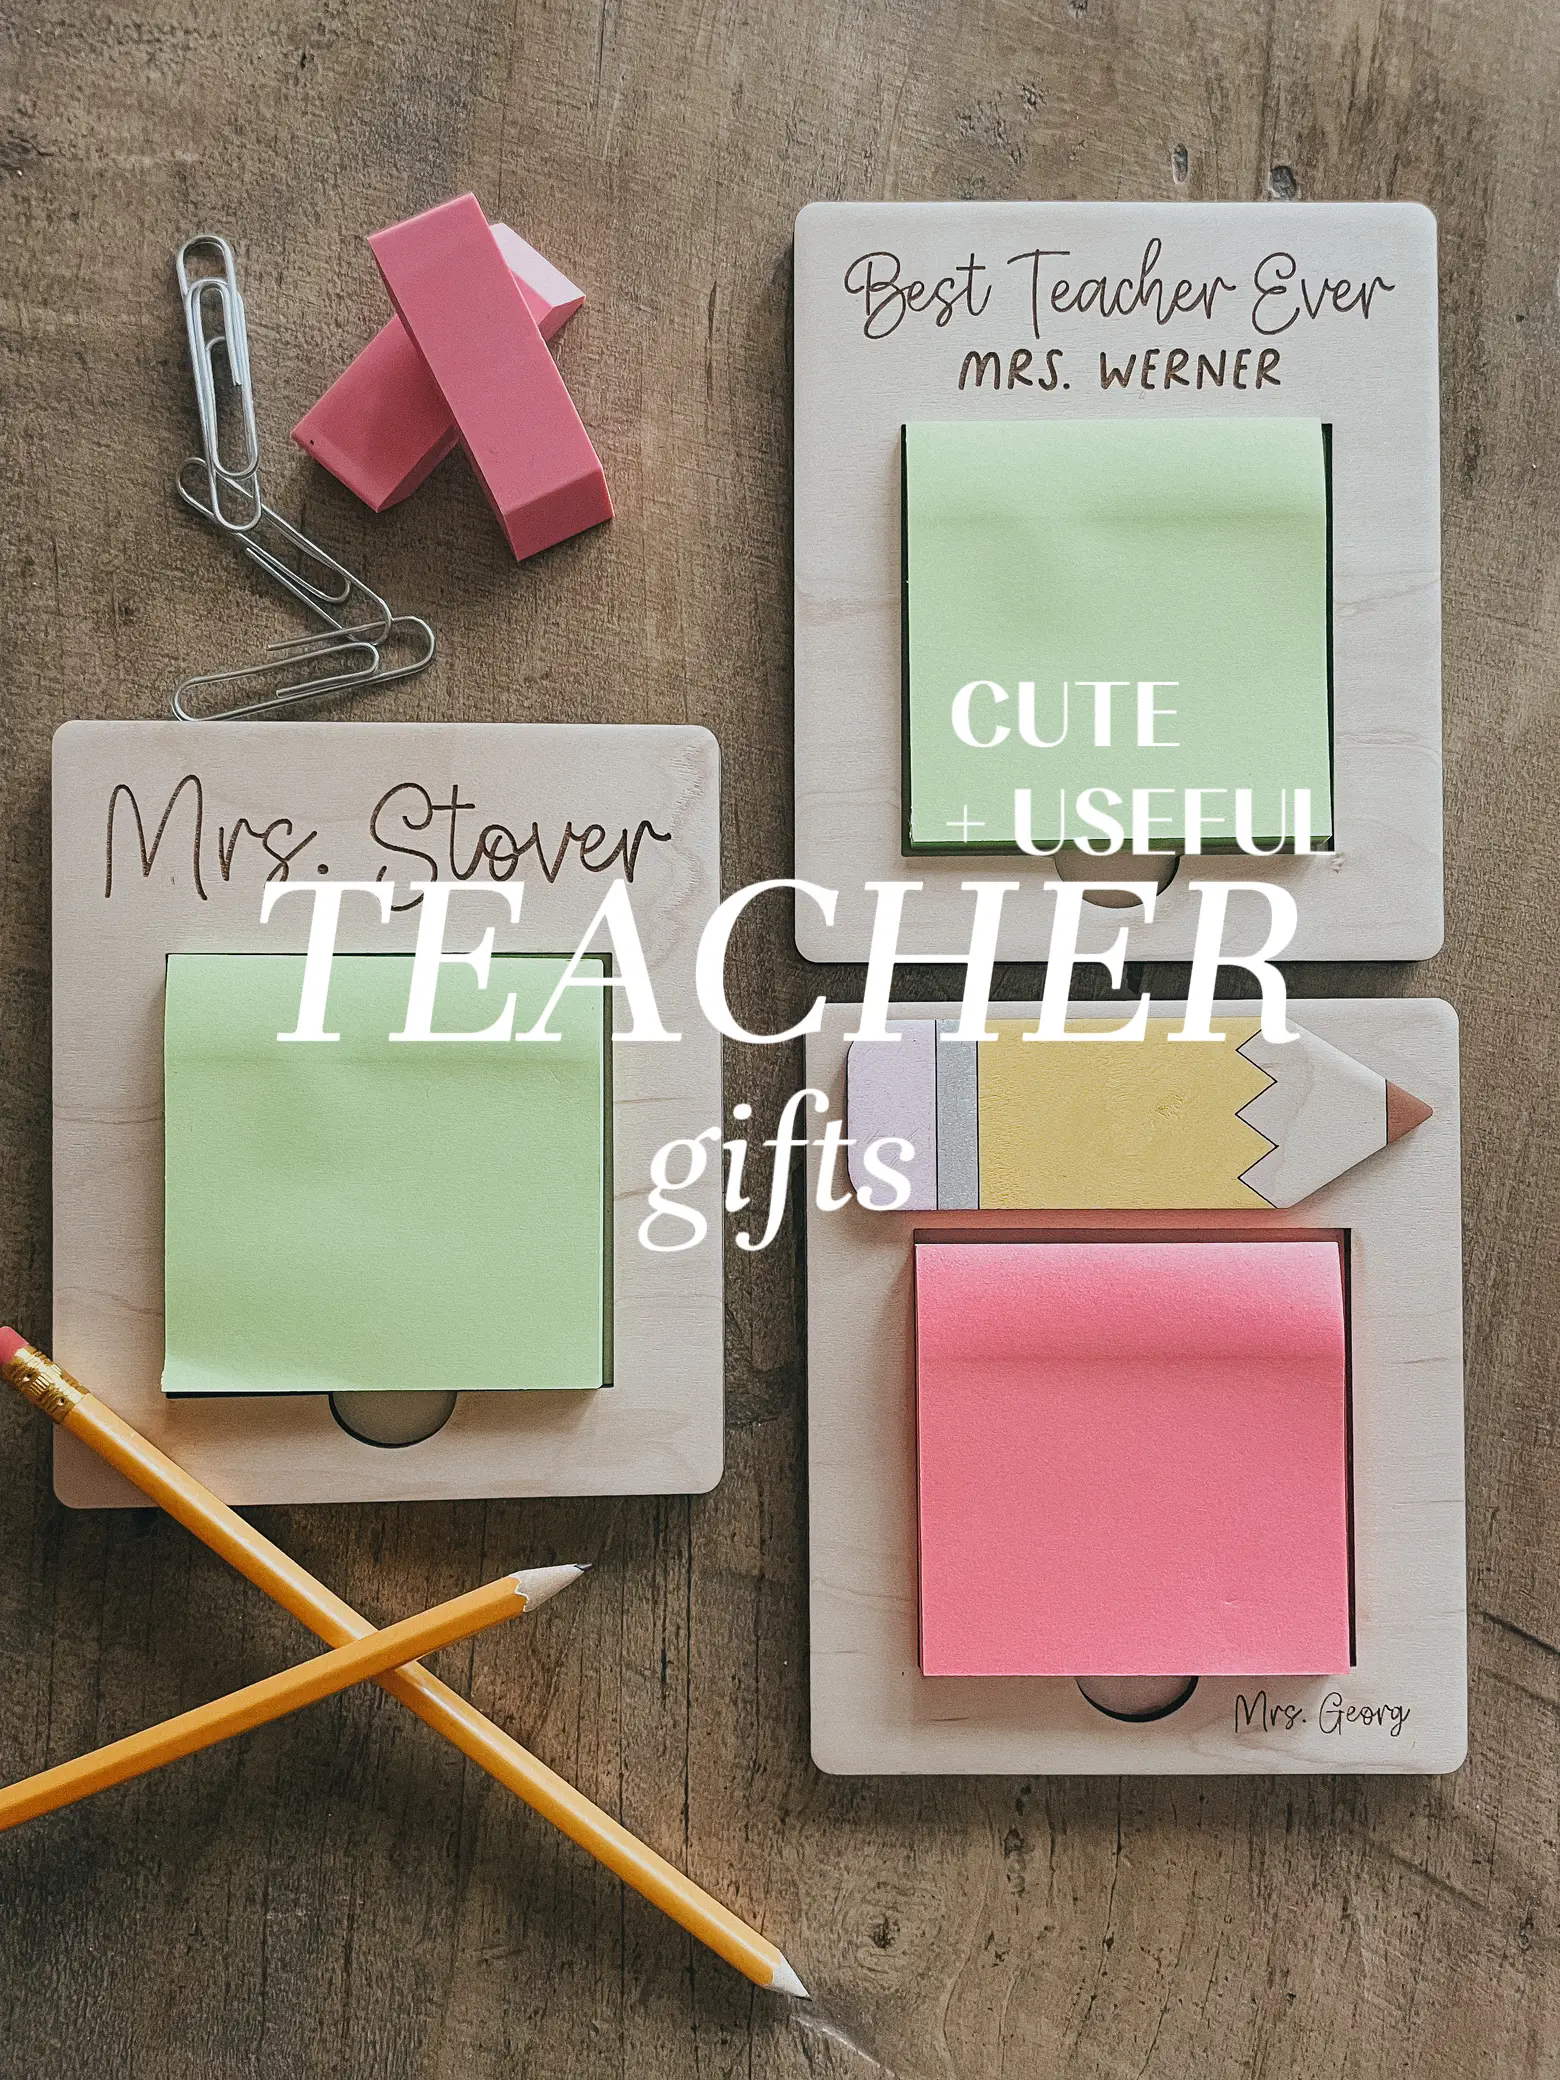 Aesthetic Pastel Sticky Notes Set of 528 with Tabs - Incl. Sturdy Cover to  Keep Your Notes Safe - Cute School Accessories, College, Students, Teachers